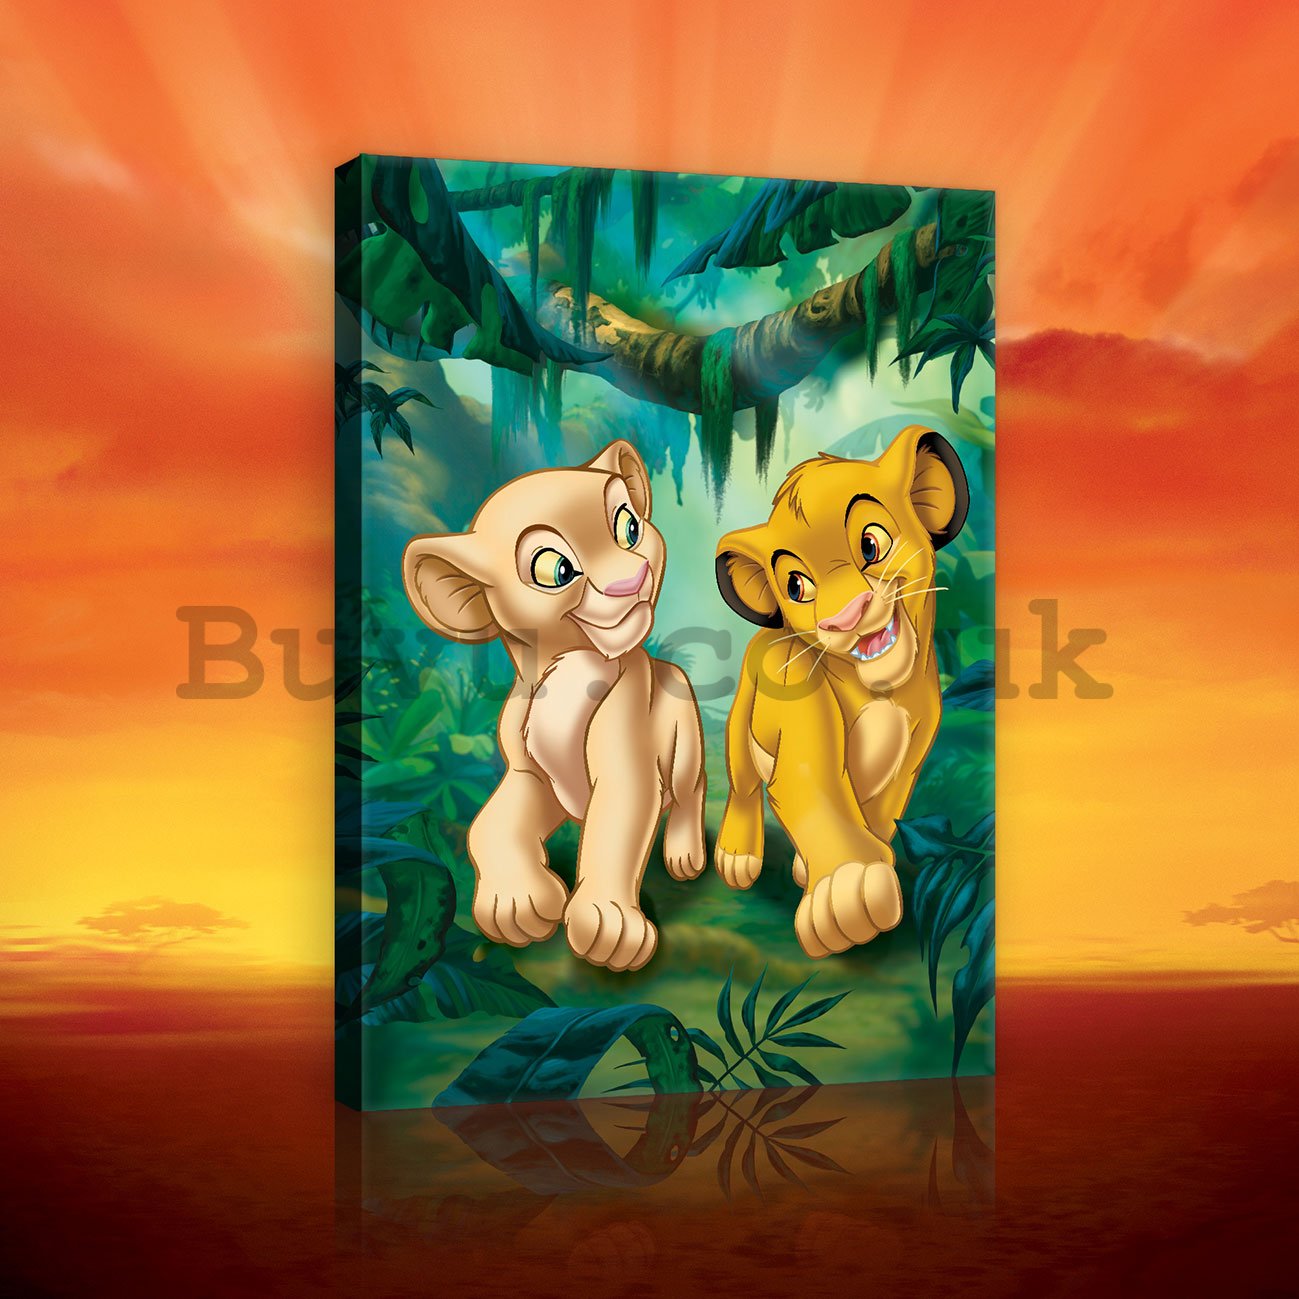 Painting on canvas: The Lion King (Mufasa and Nala) - 40x60 cm